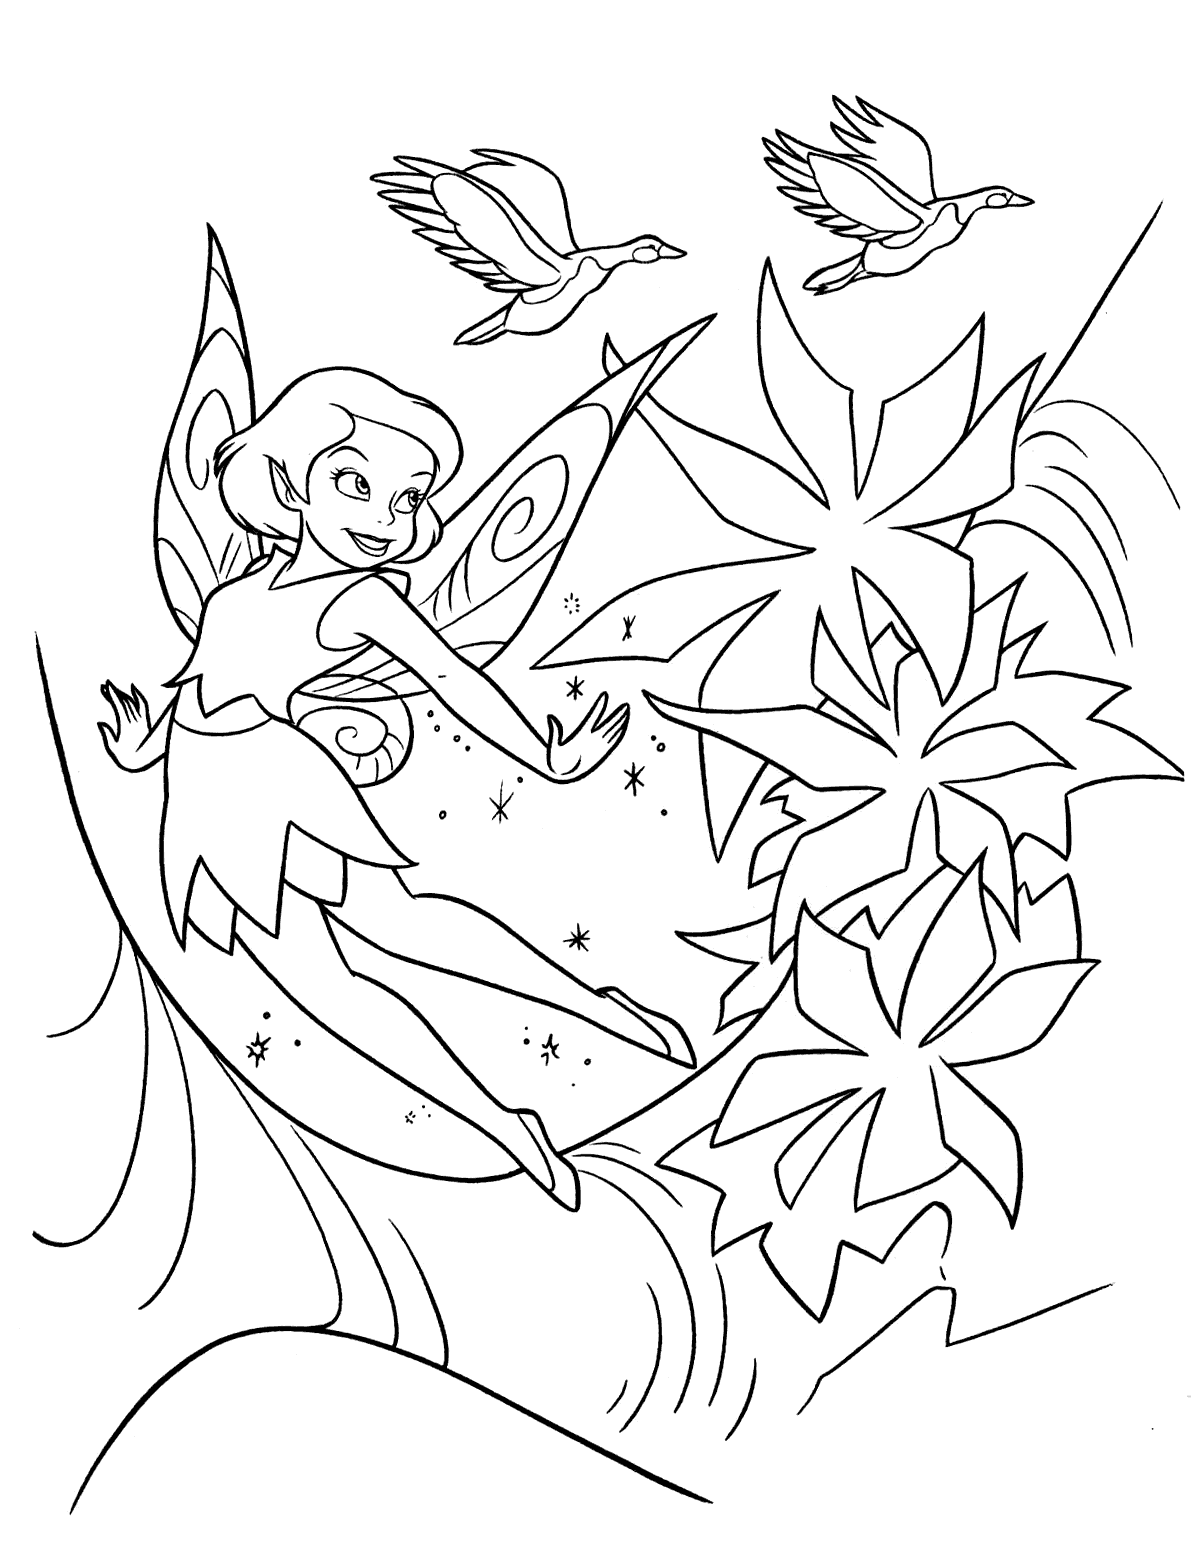 Download Coloring page - Fairy and flowers